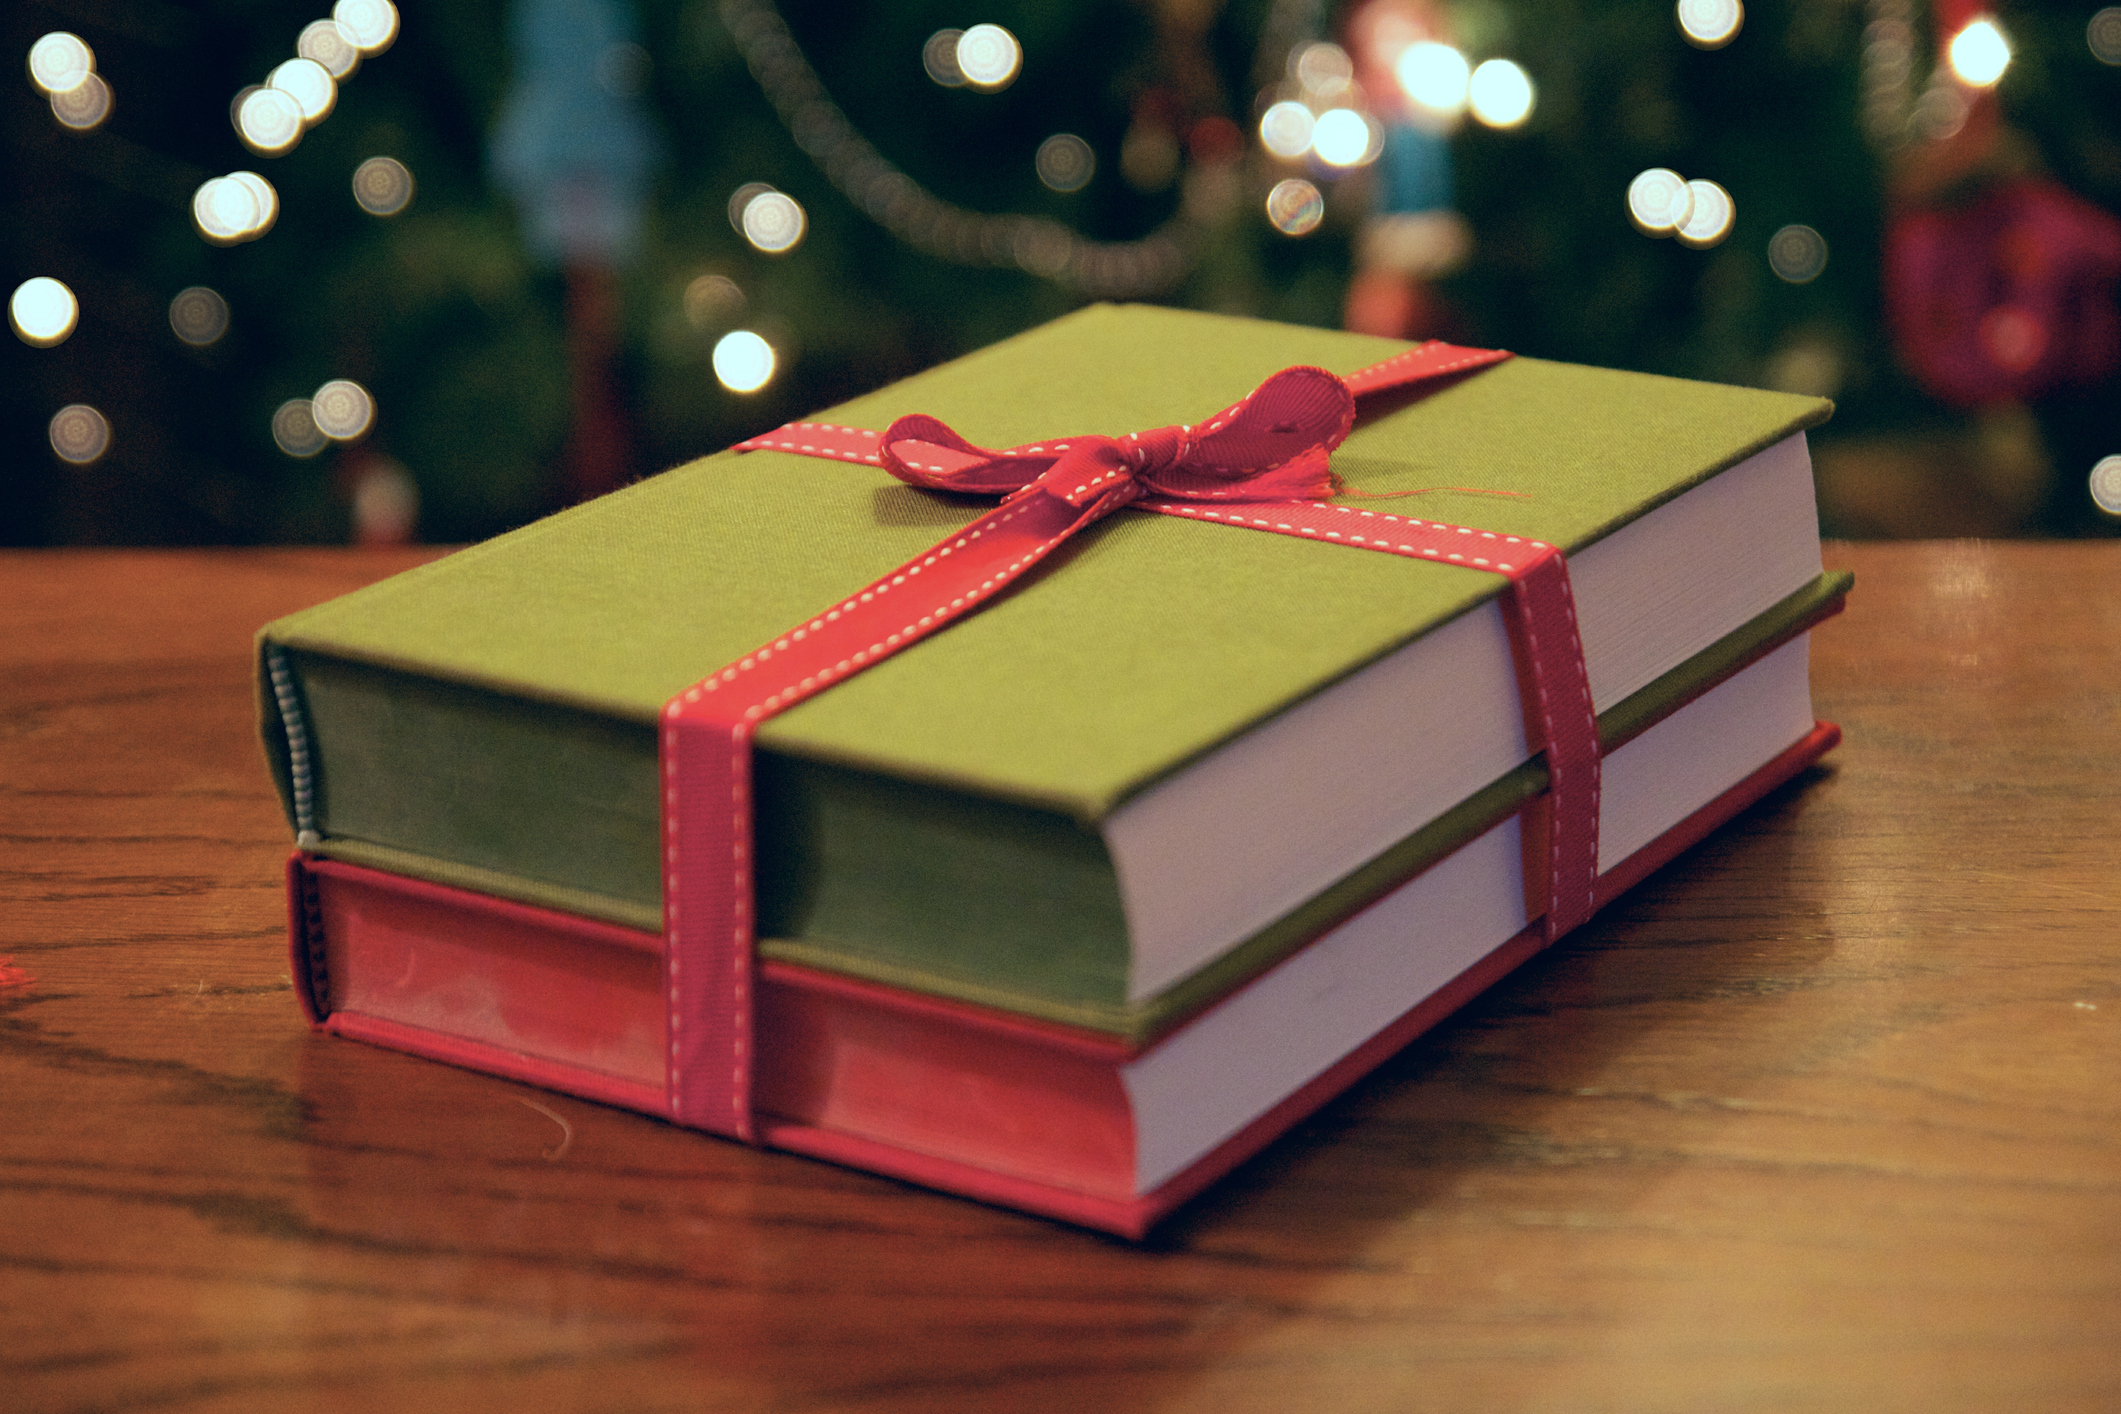 Cozy Gift Ideas for Book Lovers - Read! Bake! Create!